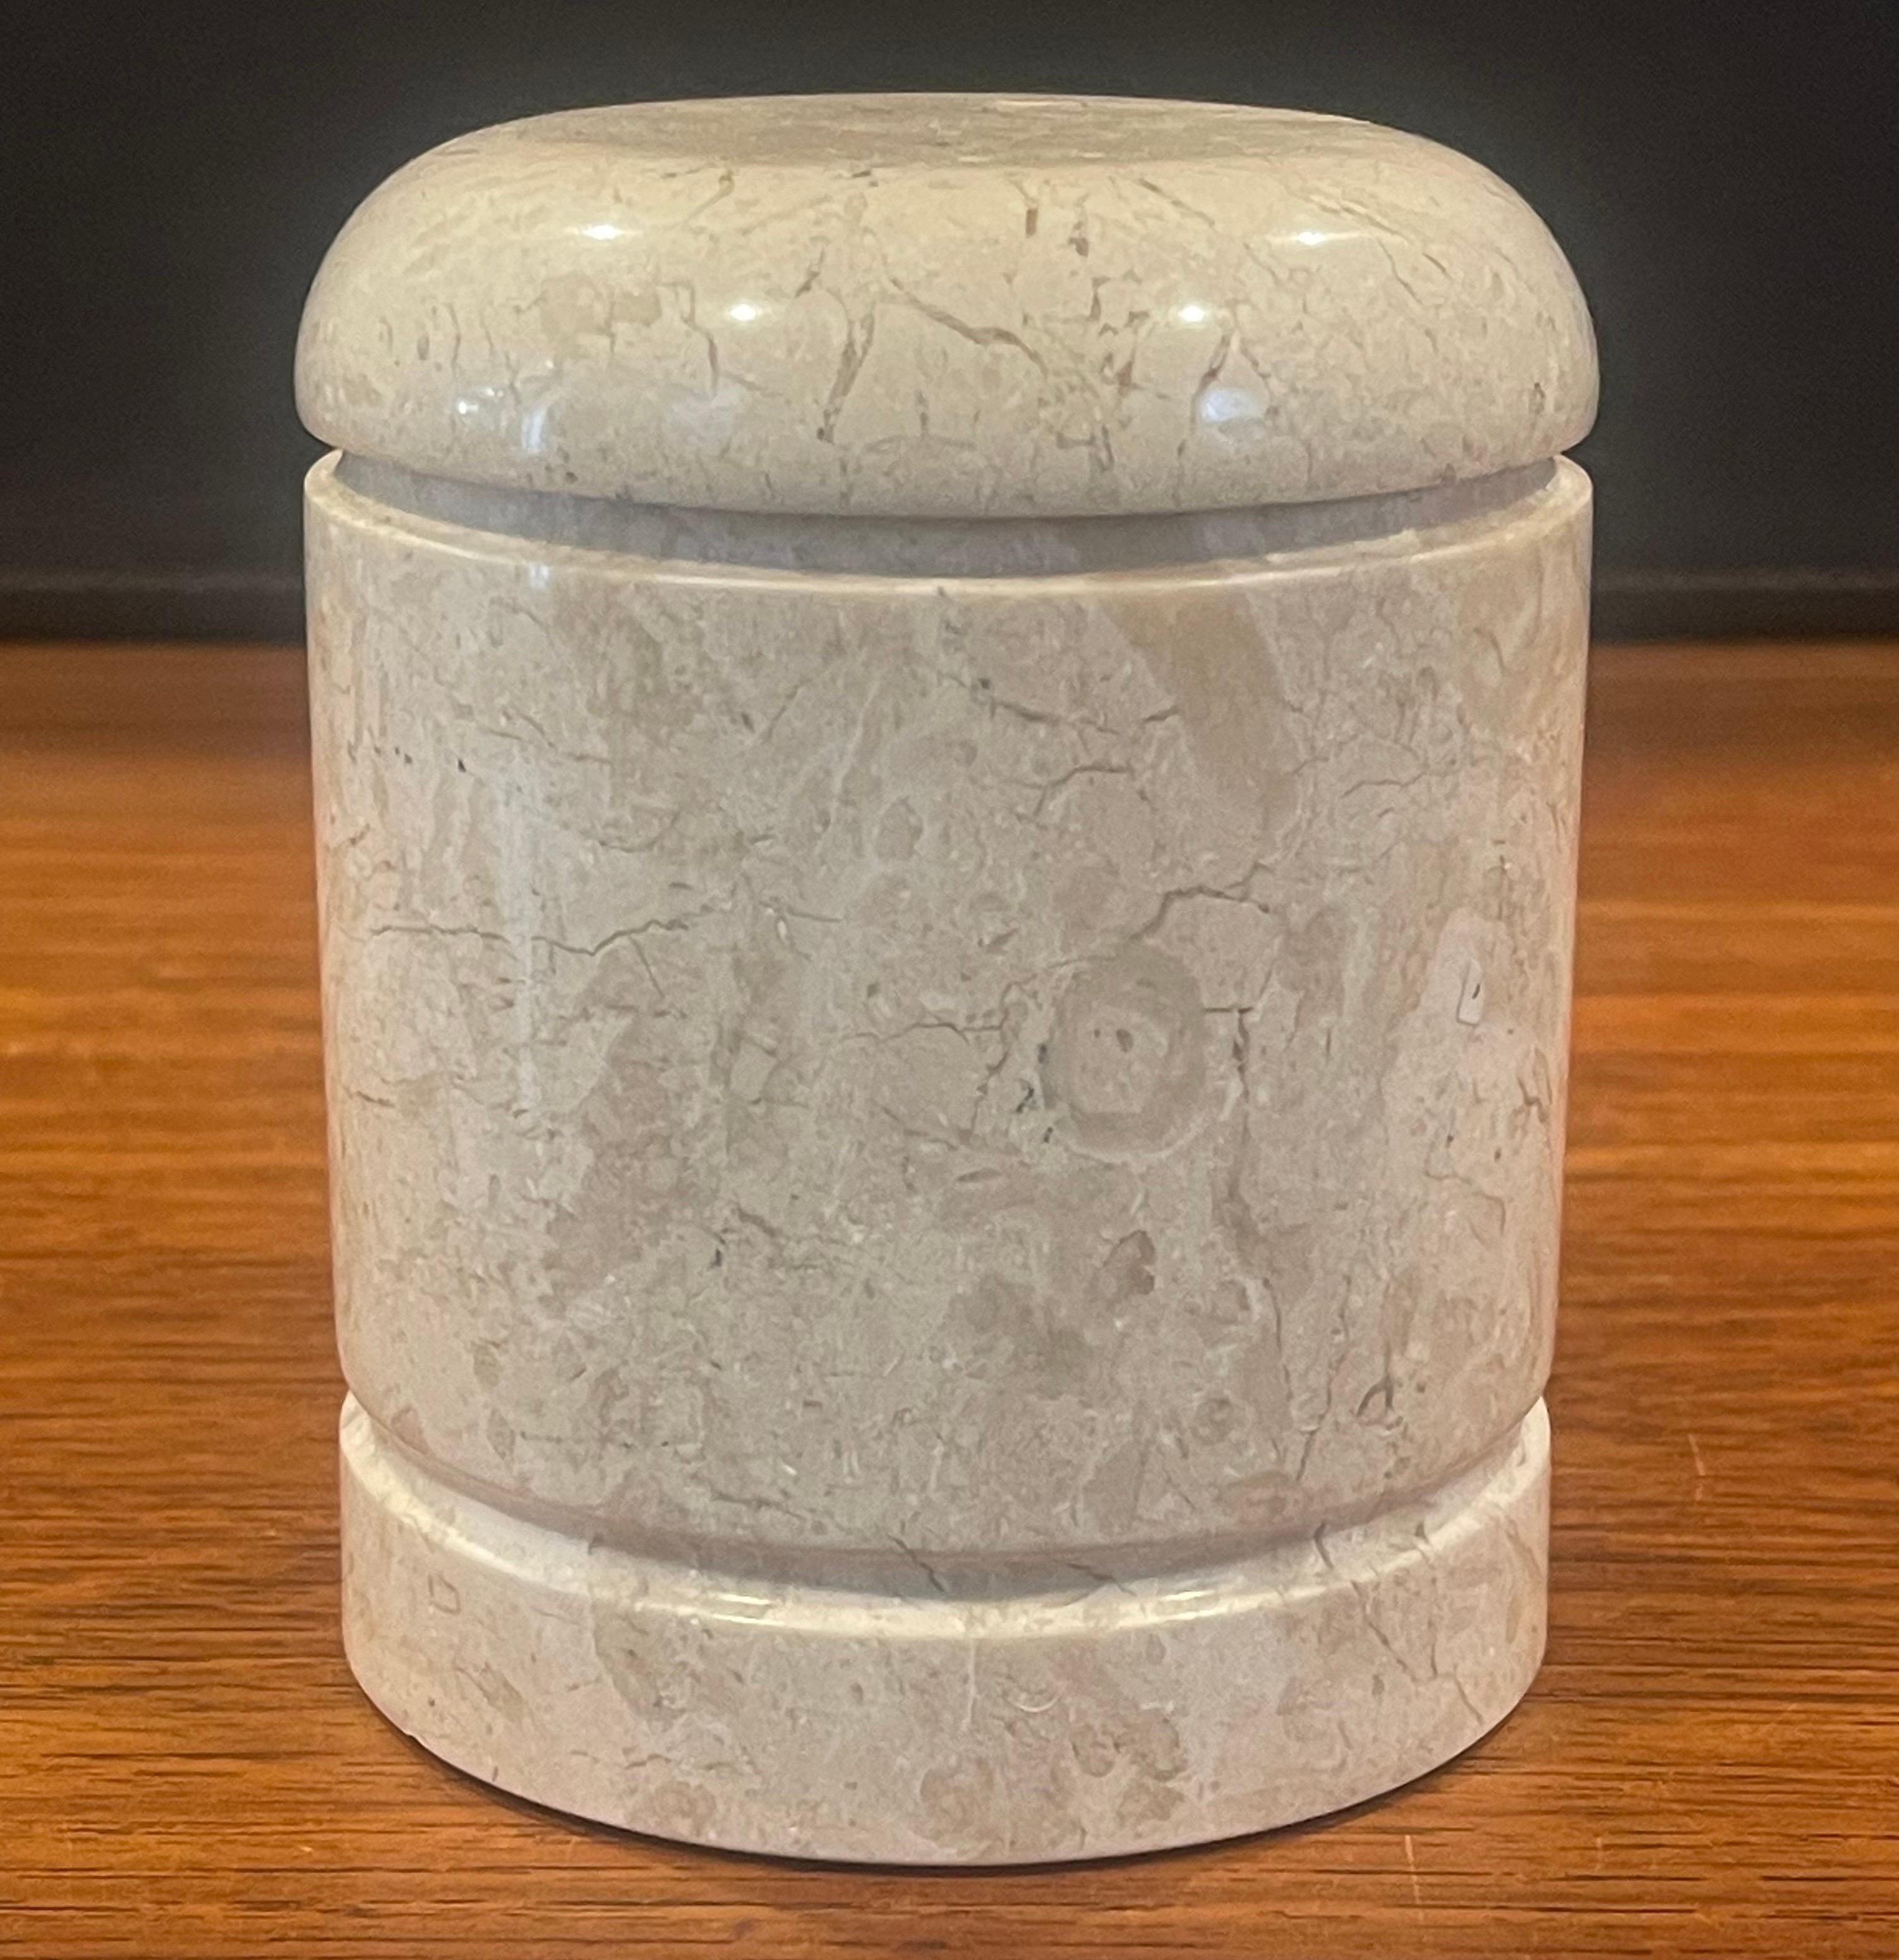 Post-modern Italian travertine lidded jar, circa 1970s. The jar is in very good vintage condition with no chips or cracks and measures 3.5